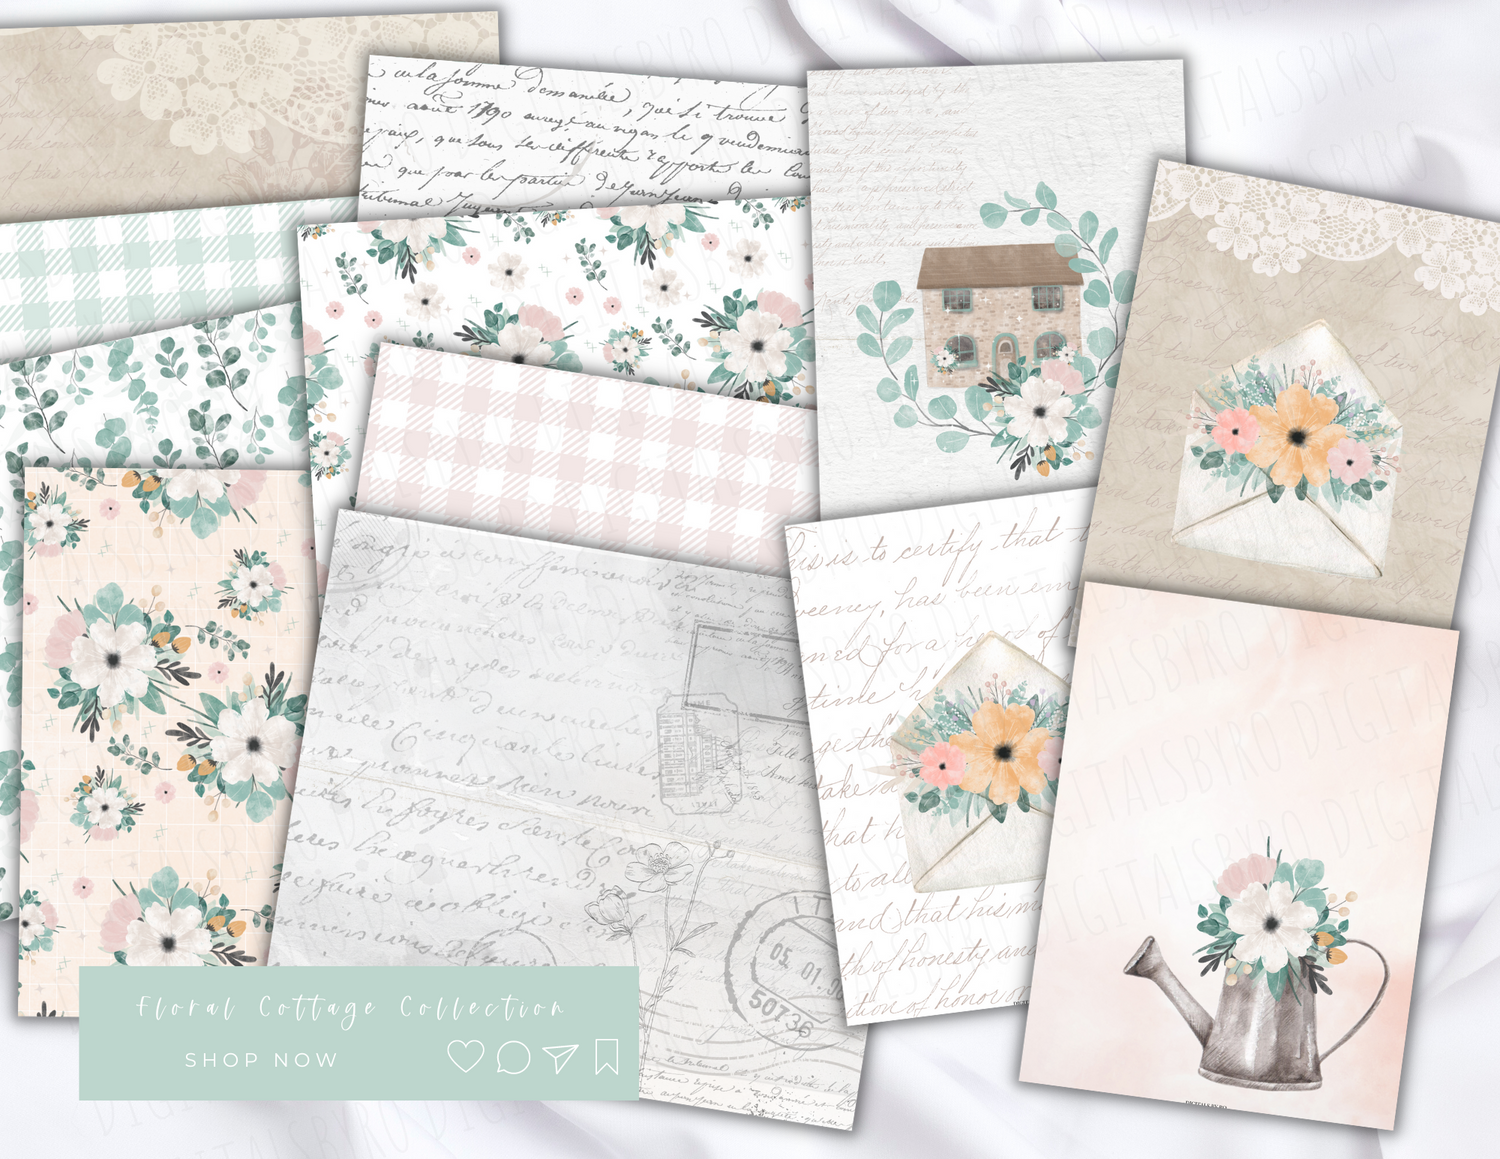 Floral Cottage Collection